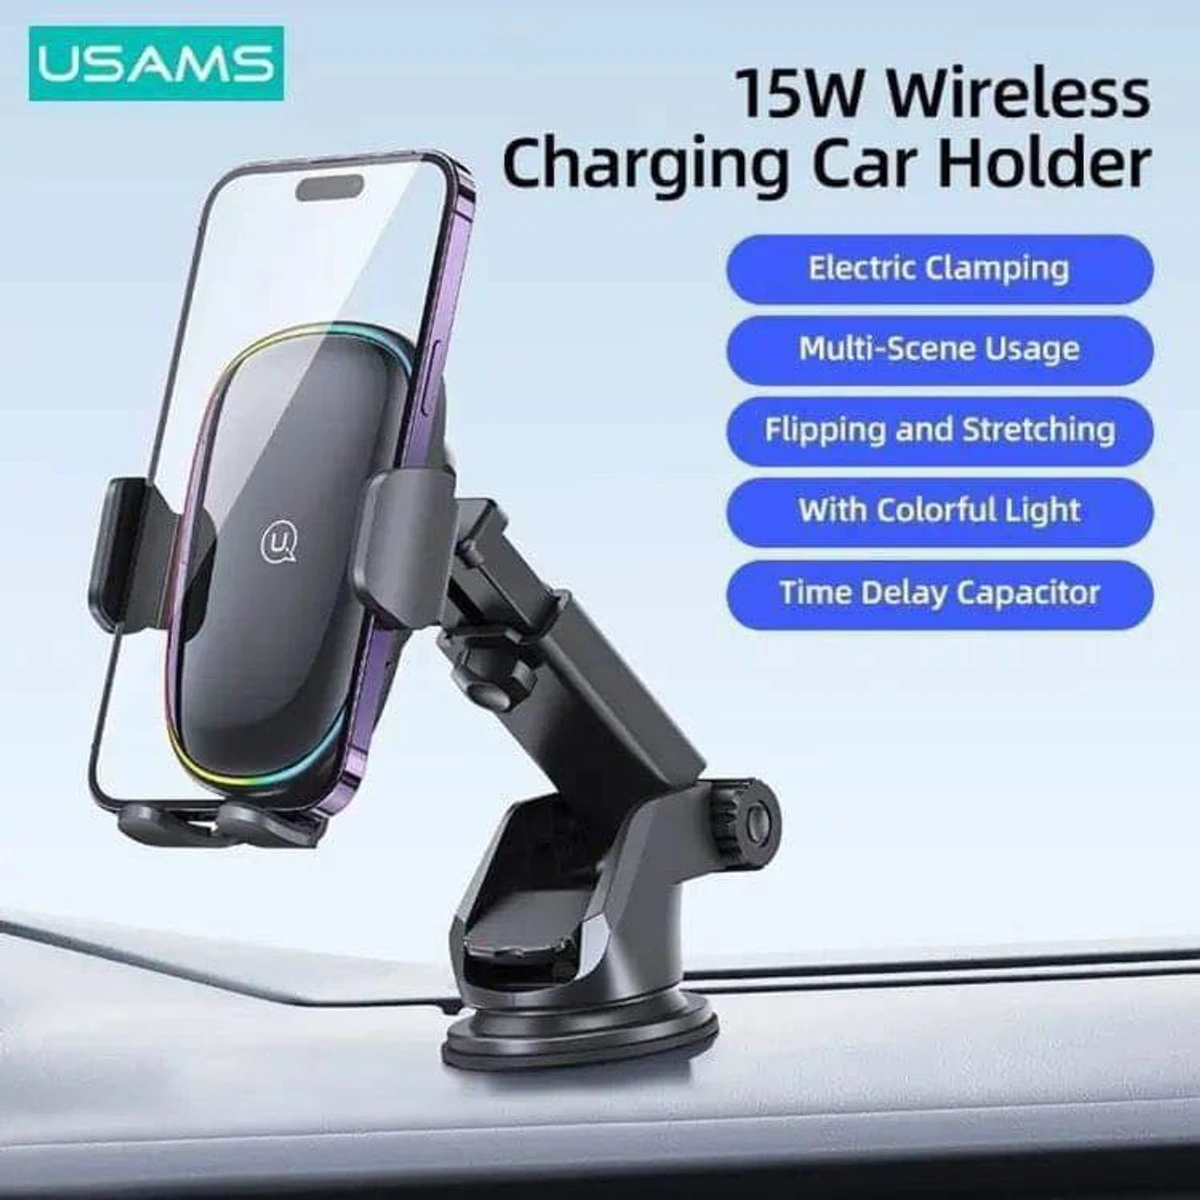 USAMS 15W Wireless Charging Car Holder With Colorful Light